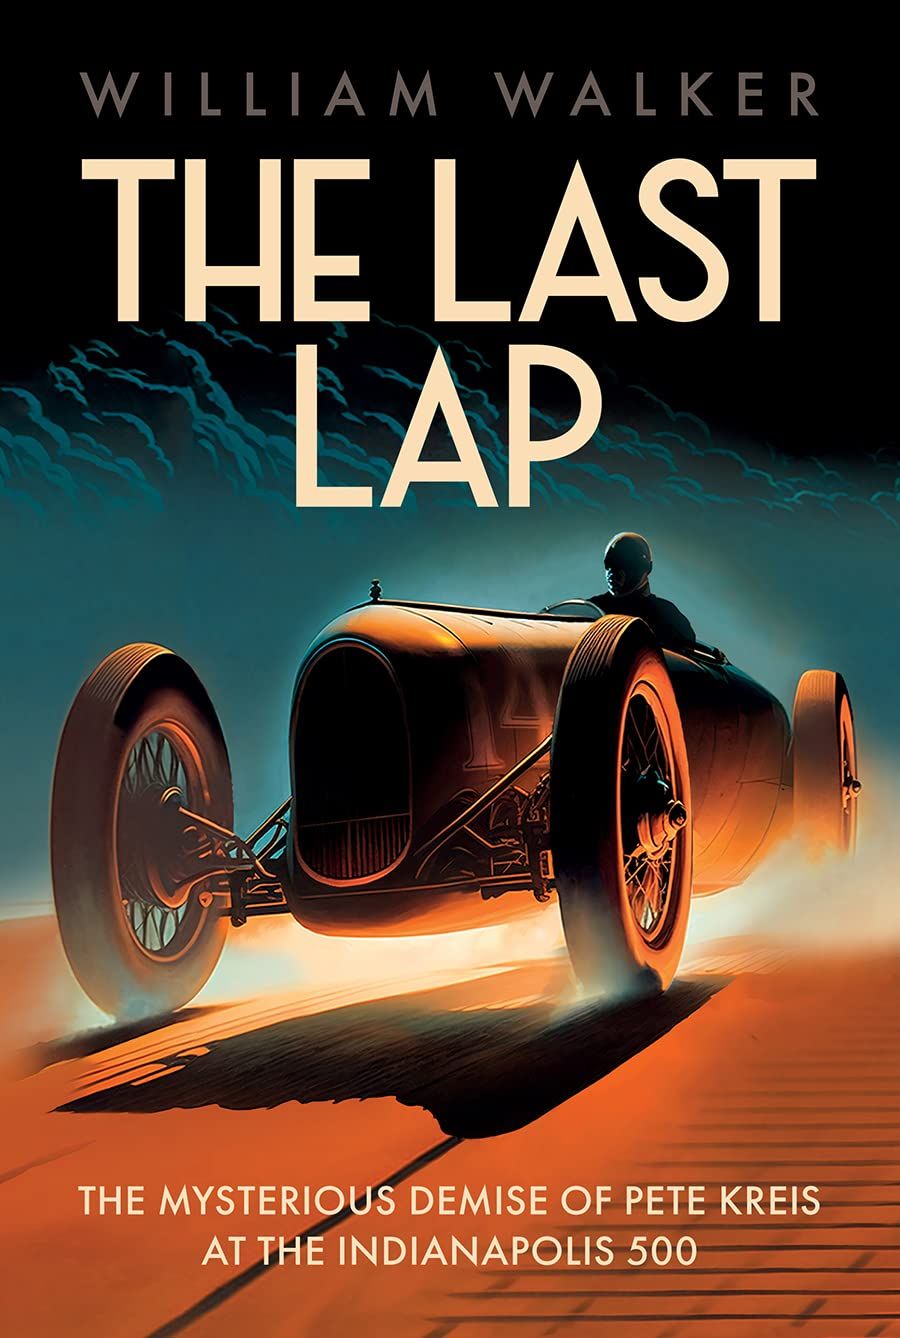 The Last Lap: The Mysterious Demise of Pete Kreis at The Indianapolis 500